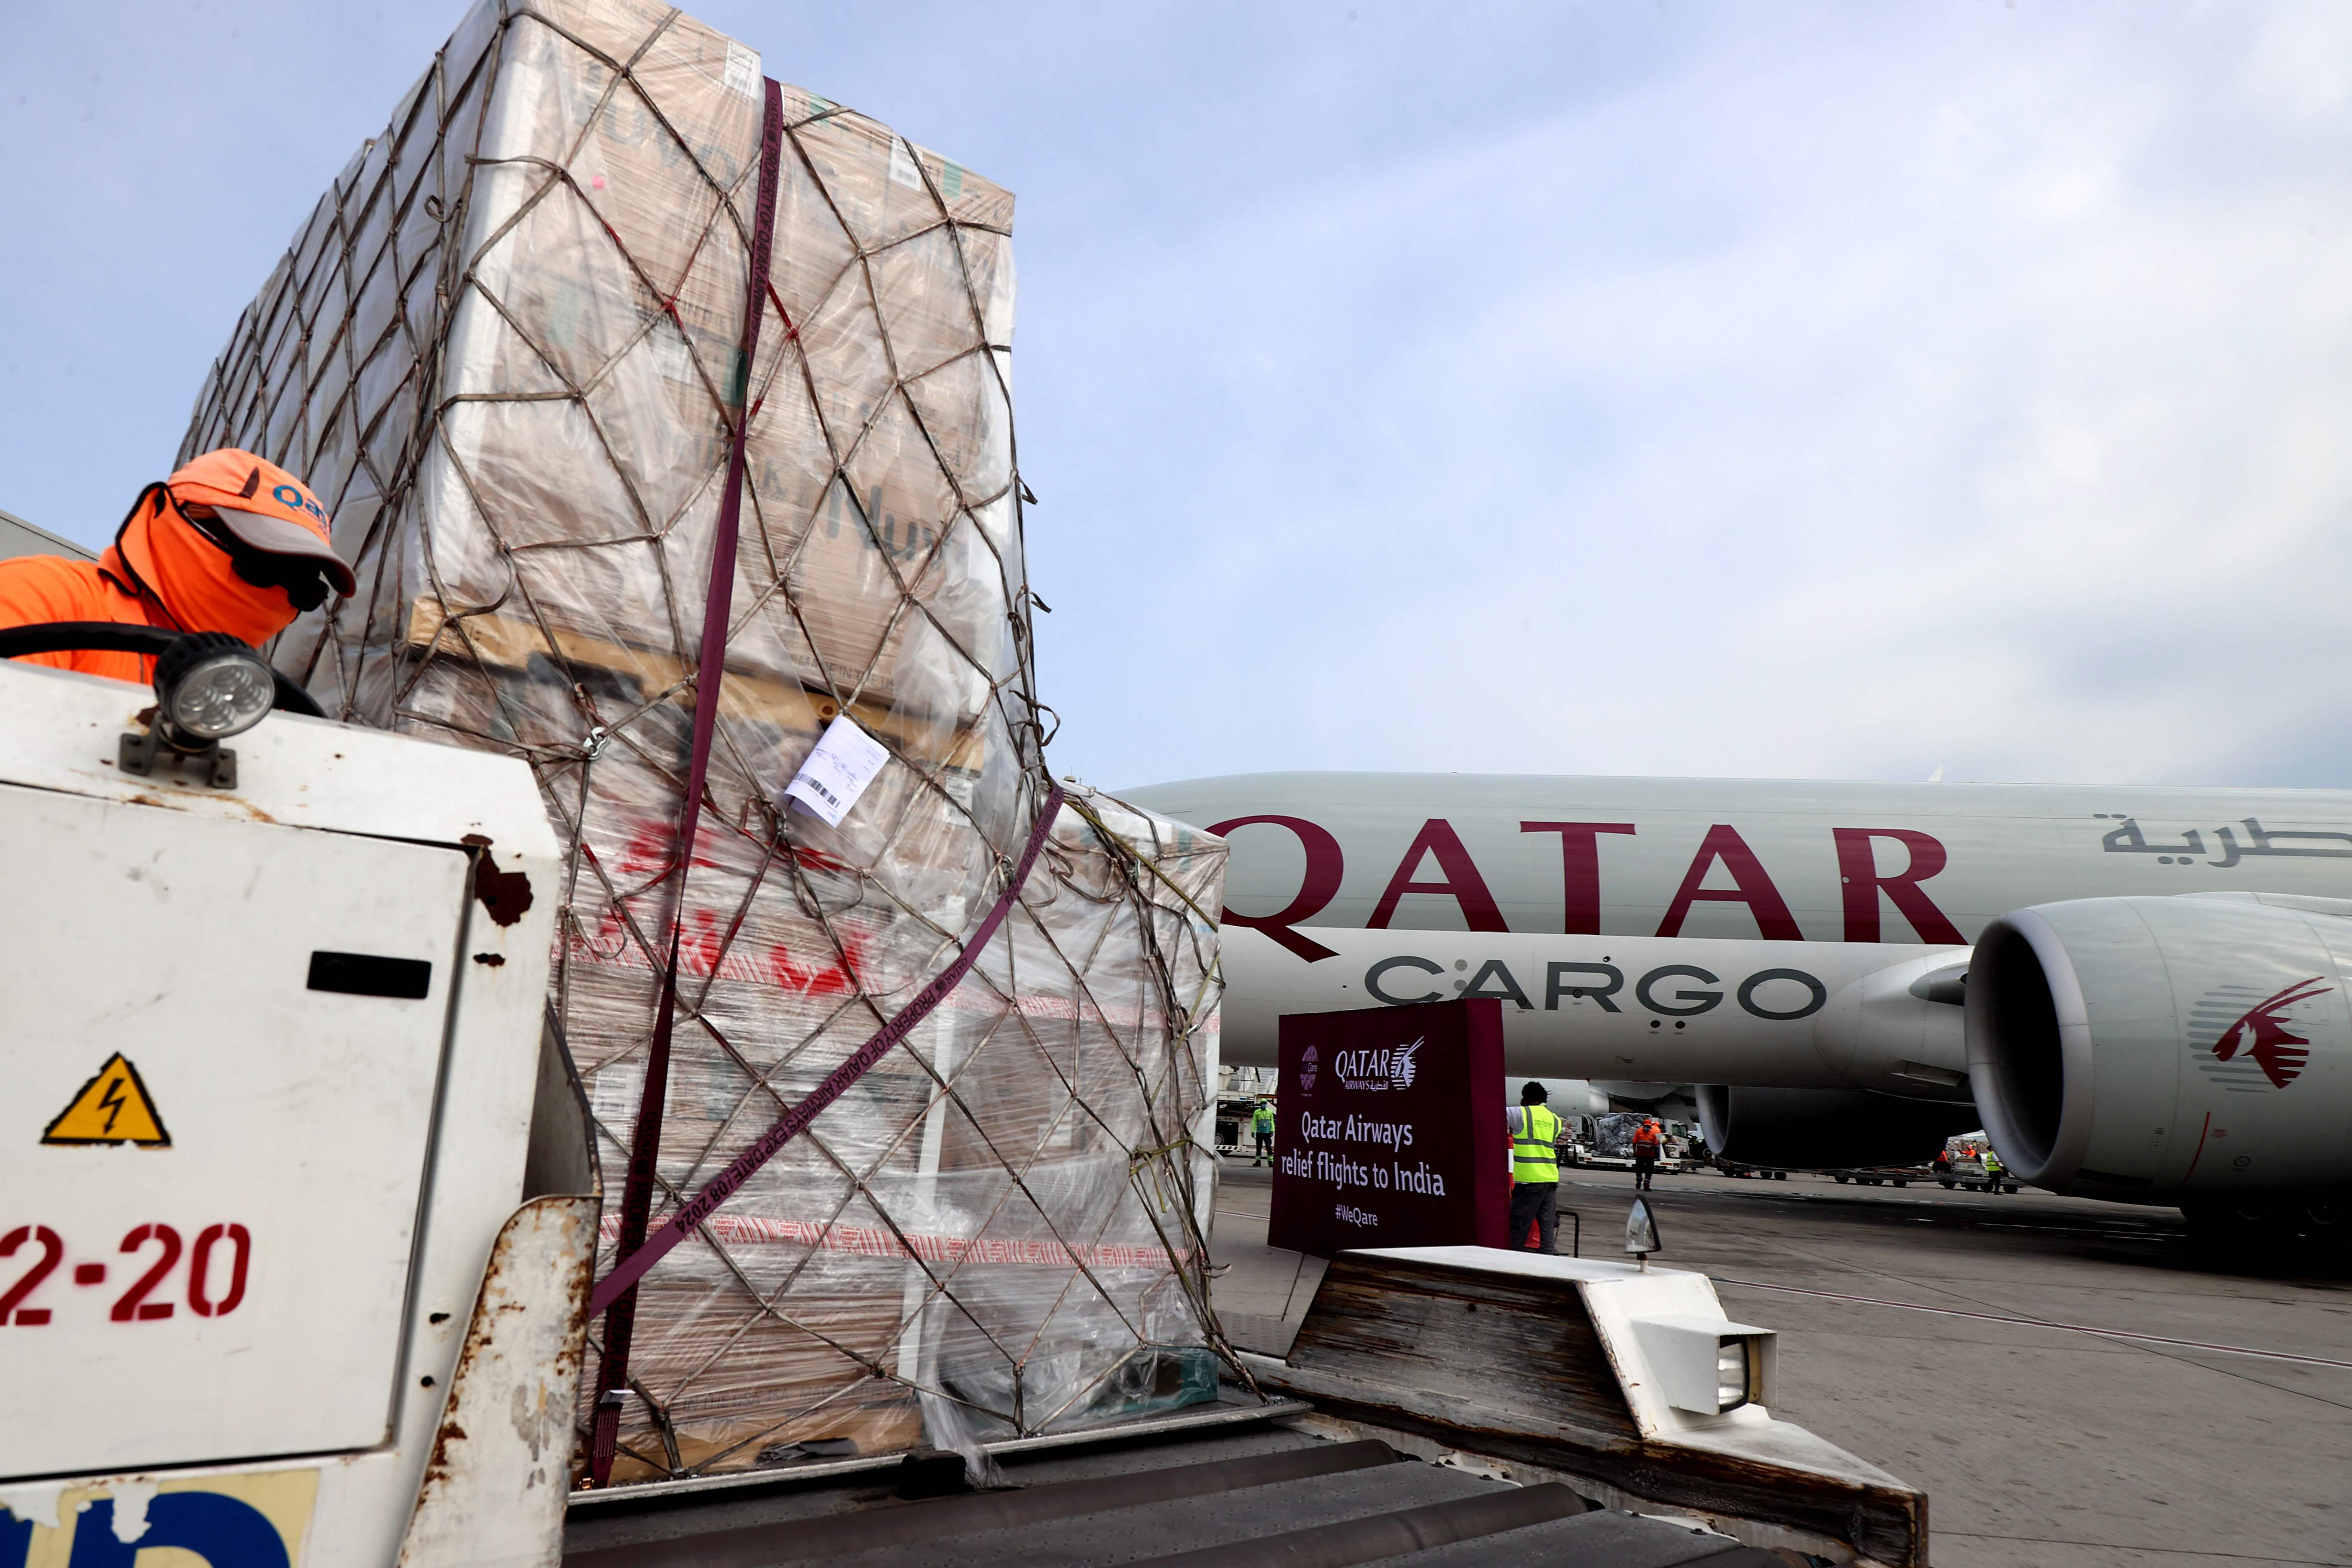 Workers load 300 tonnes of medical aid to be flown in a three-flight cargo aircraft convoy directly to destinations in India